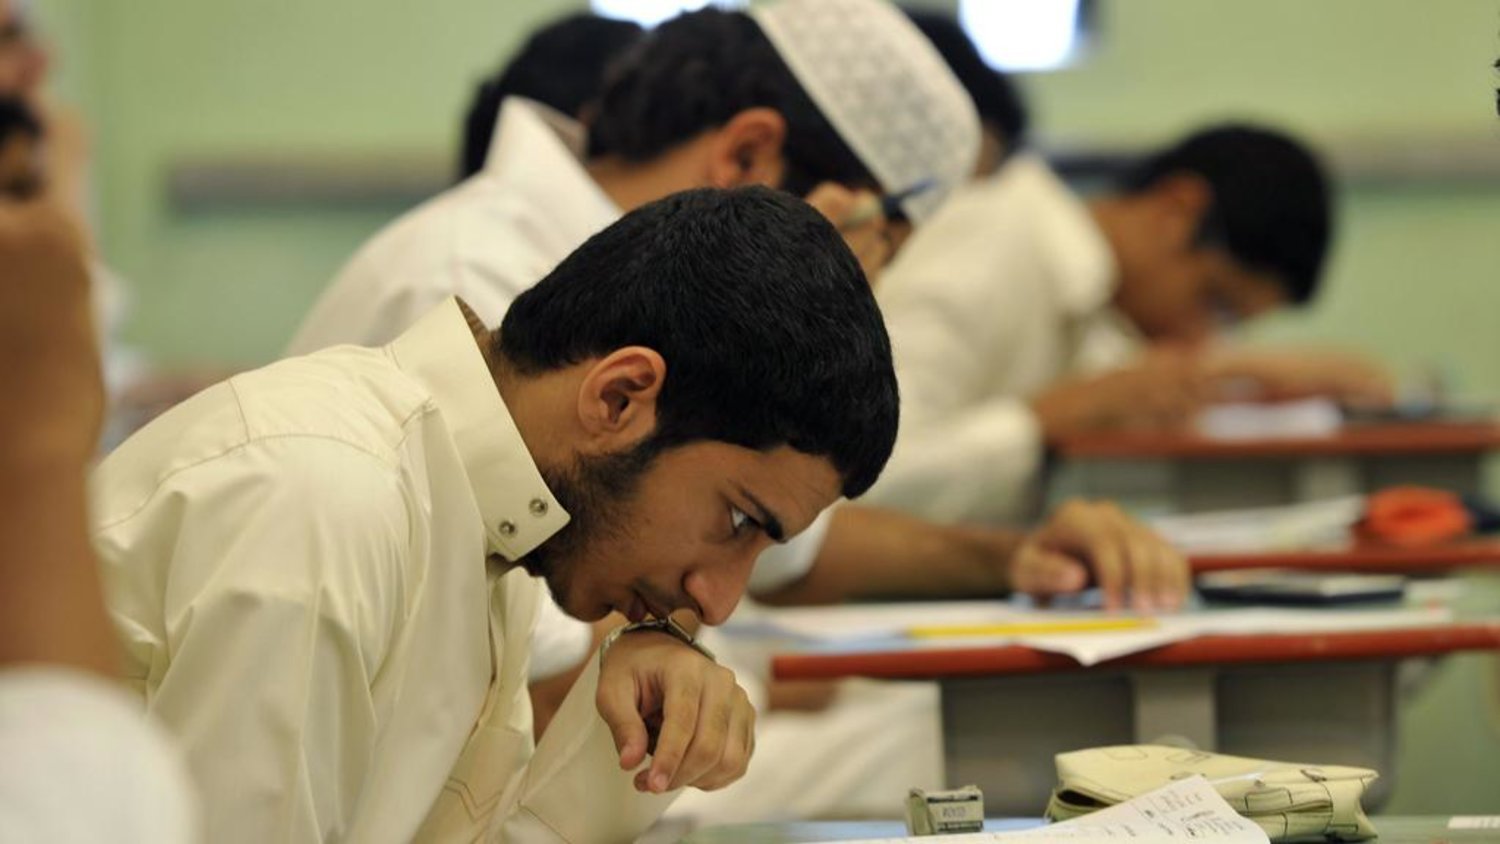 Saudi students sit for their final high school exams in the Red Sea port city of Jeddah on June 19, 2010. (AFP)